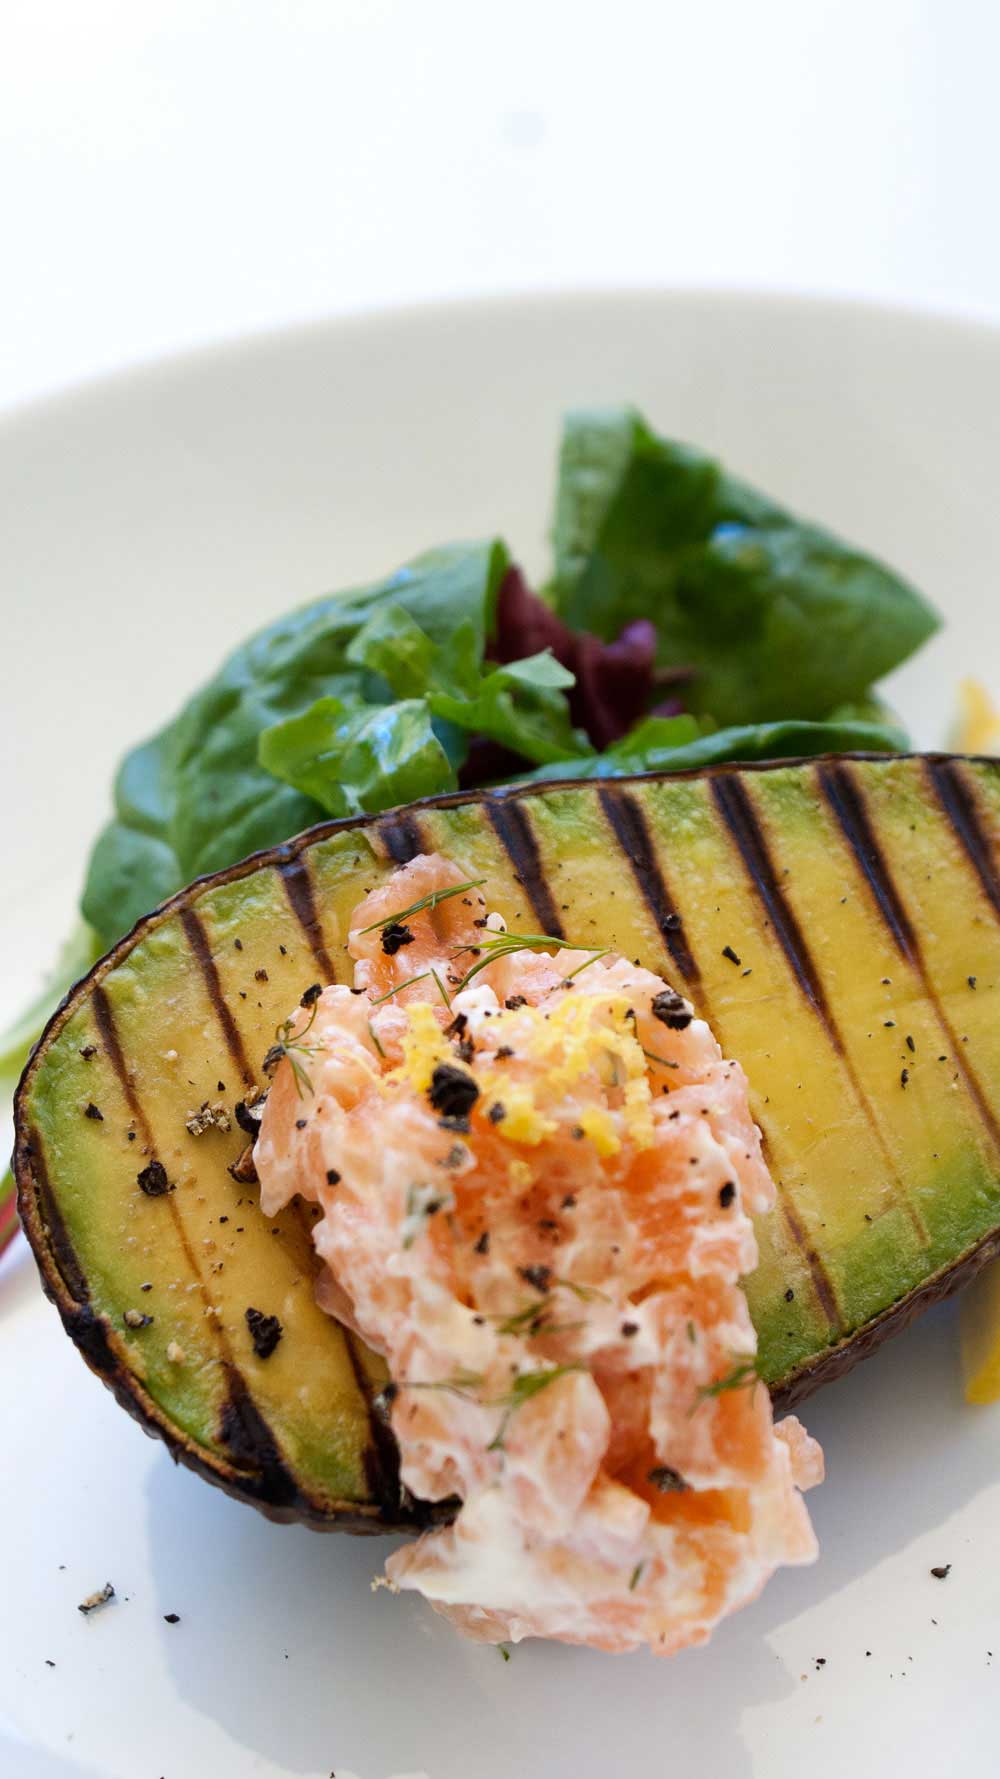 Grilled Avocado with a Smoked Salmon Cream. A fresh and delicious brunch or light lunch.